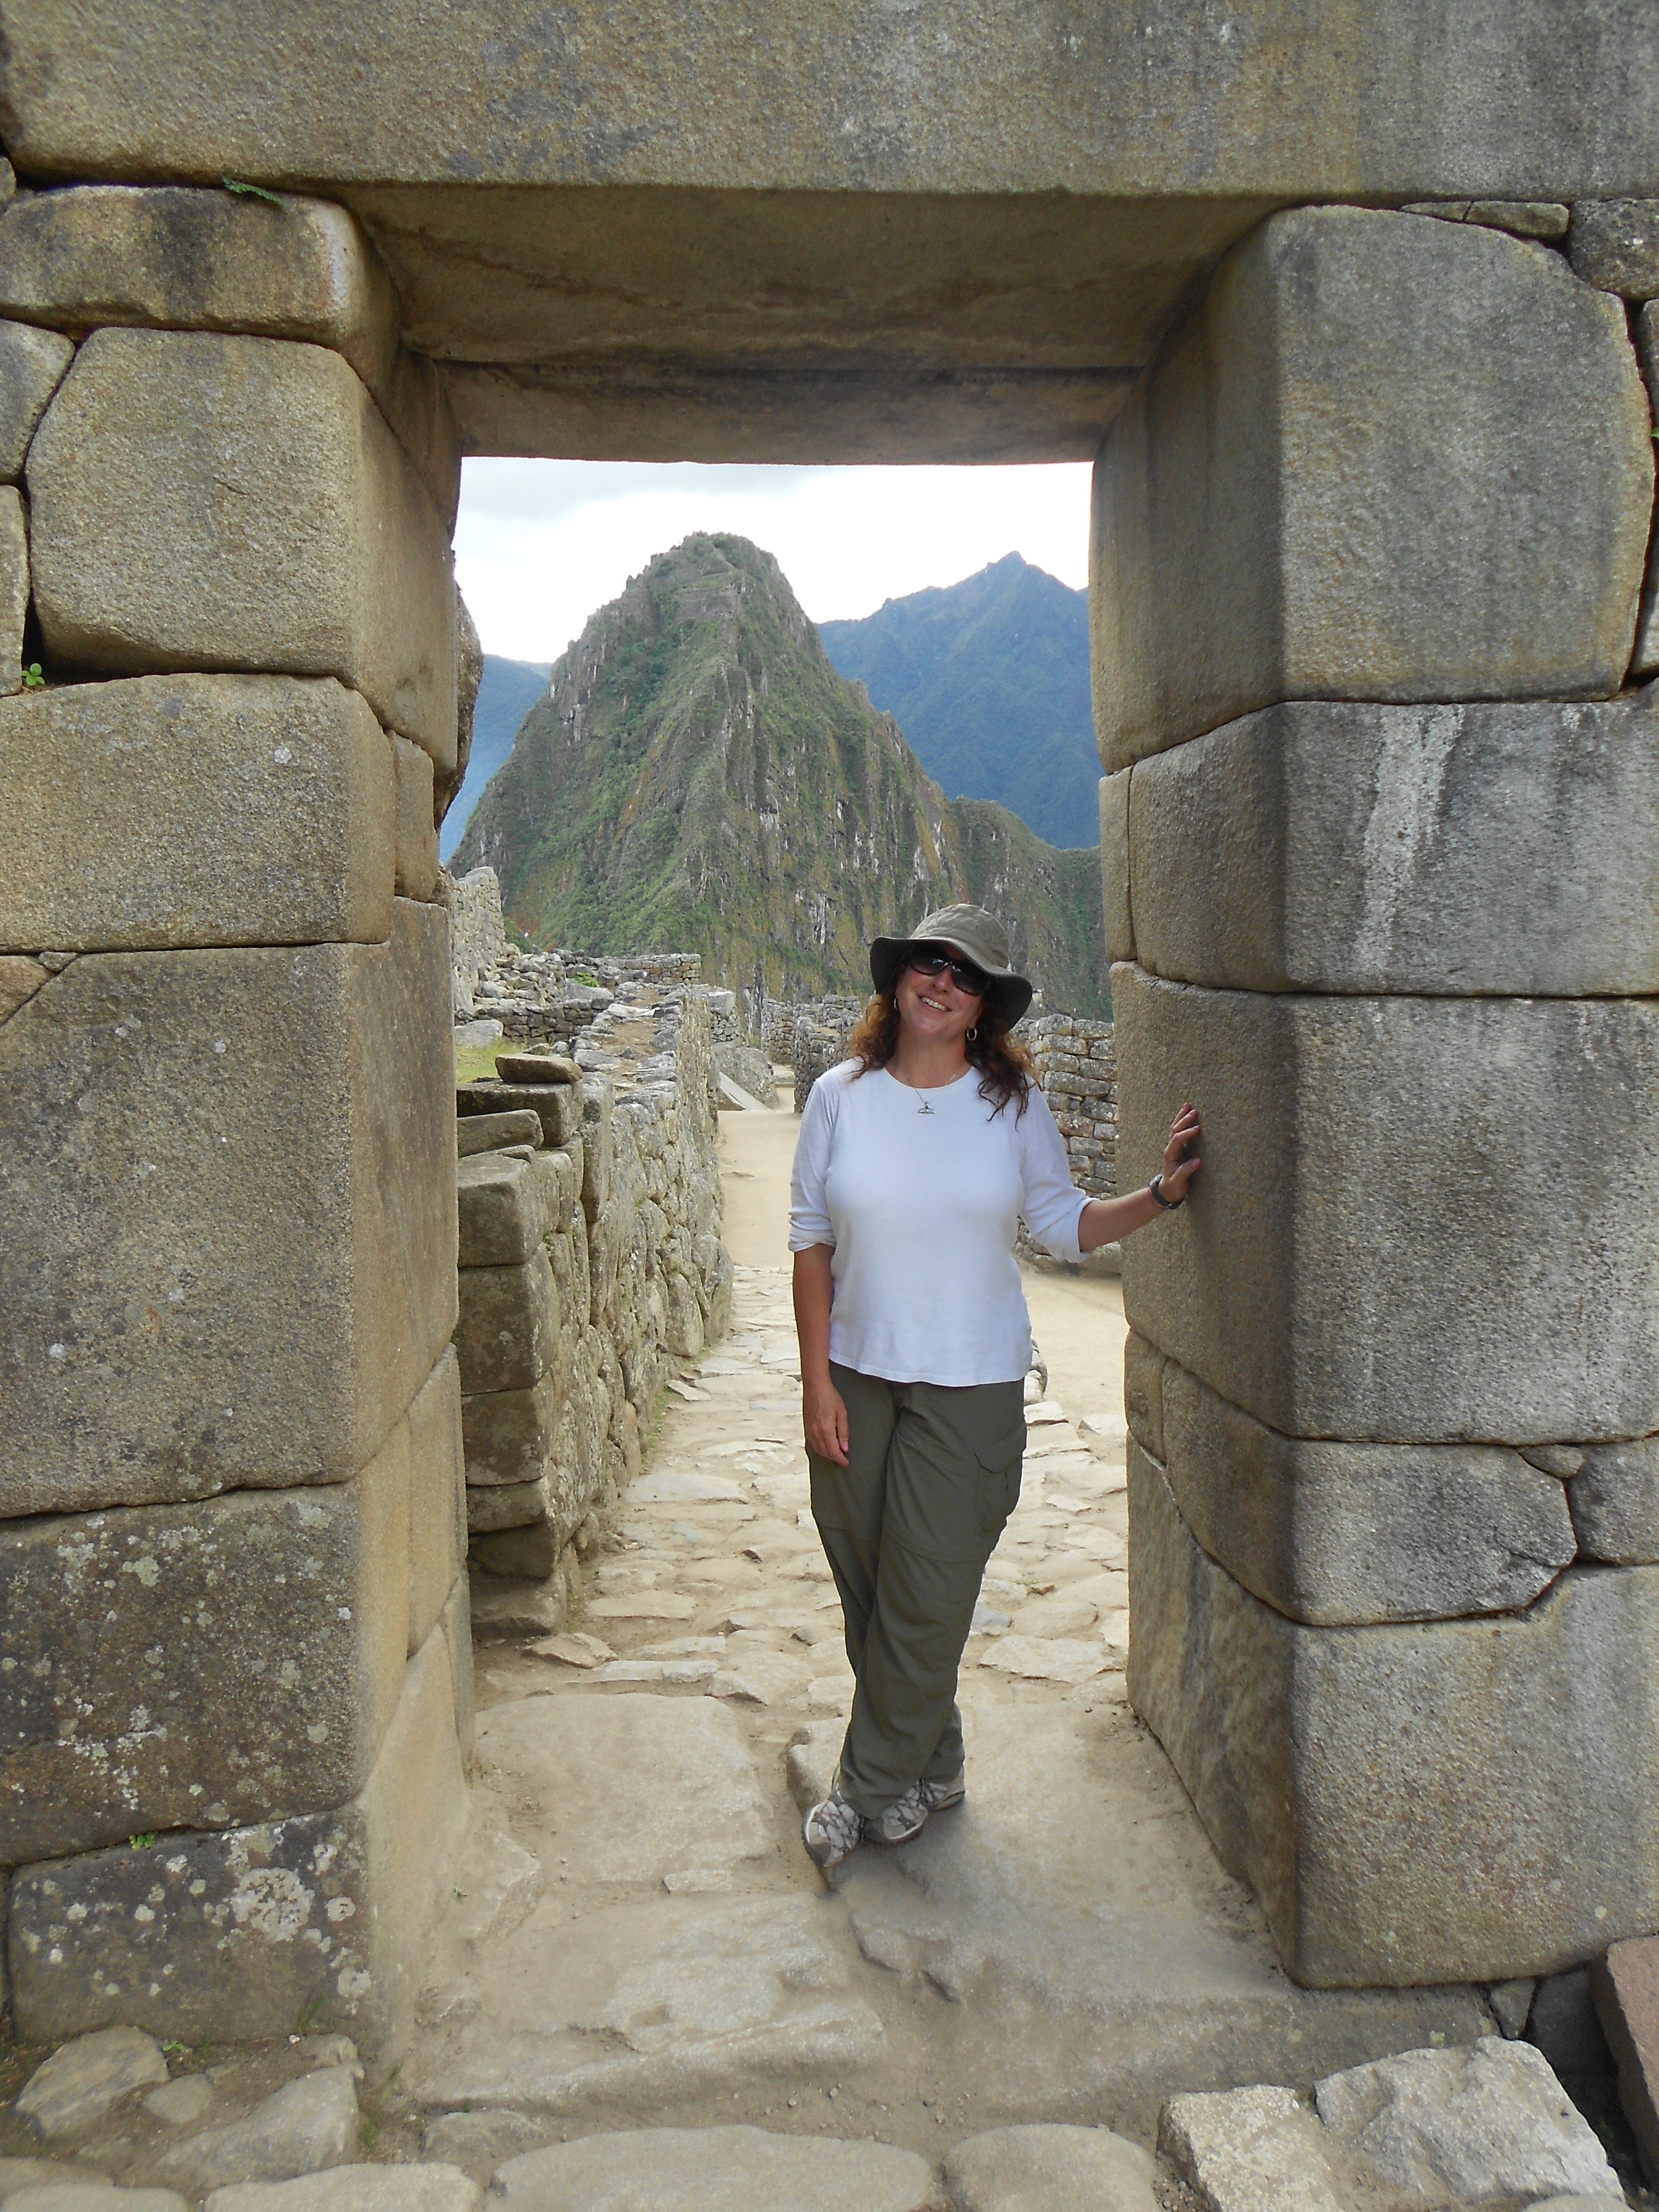 Christine Fiori stands in a stone doorway on a road leading towards the mountains at Machu Picchu.